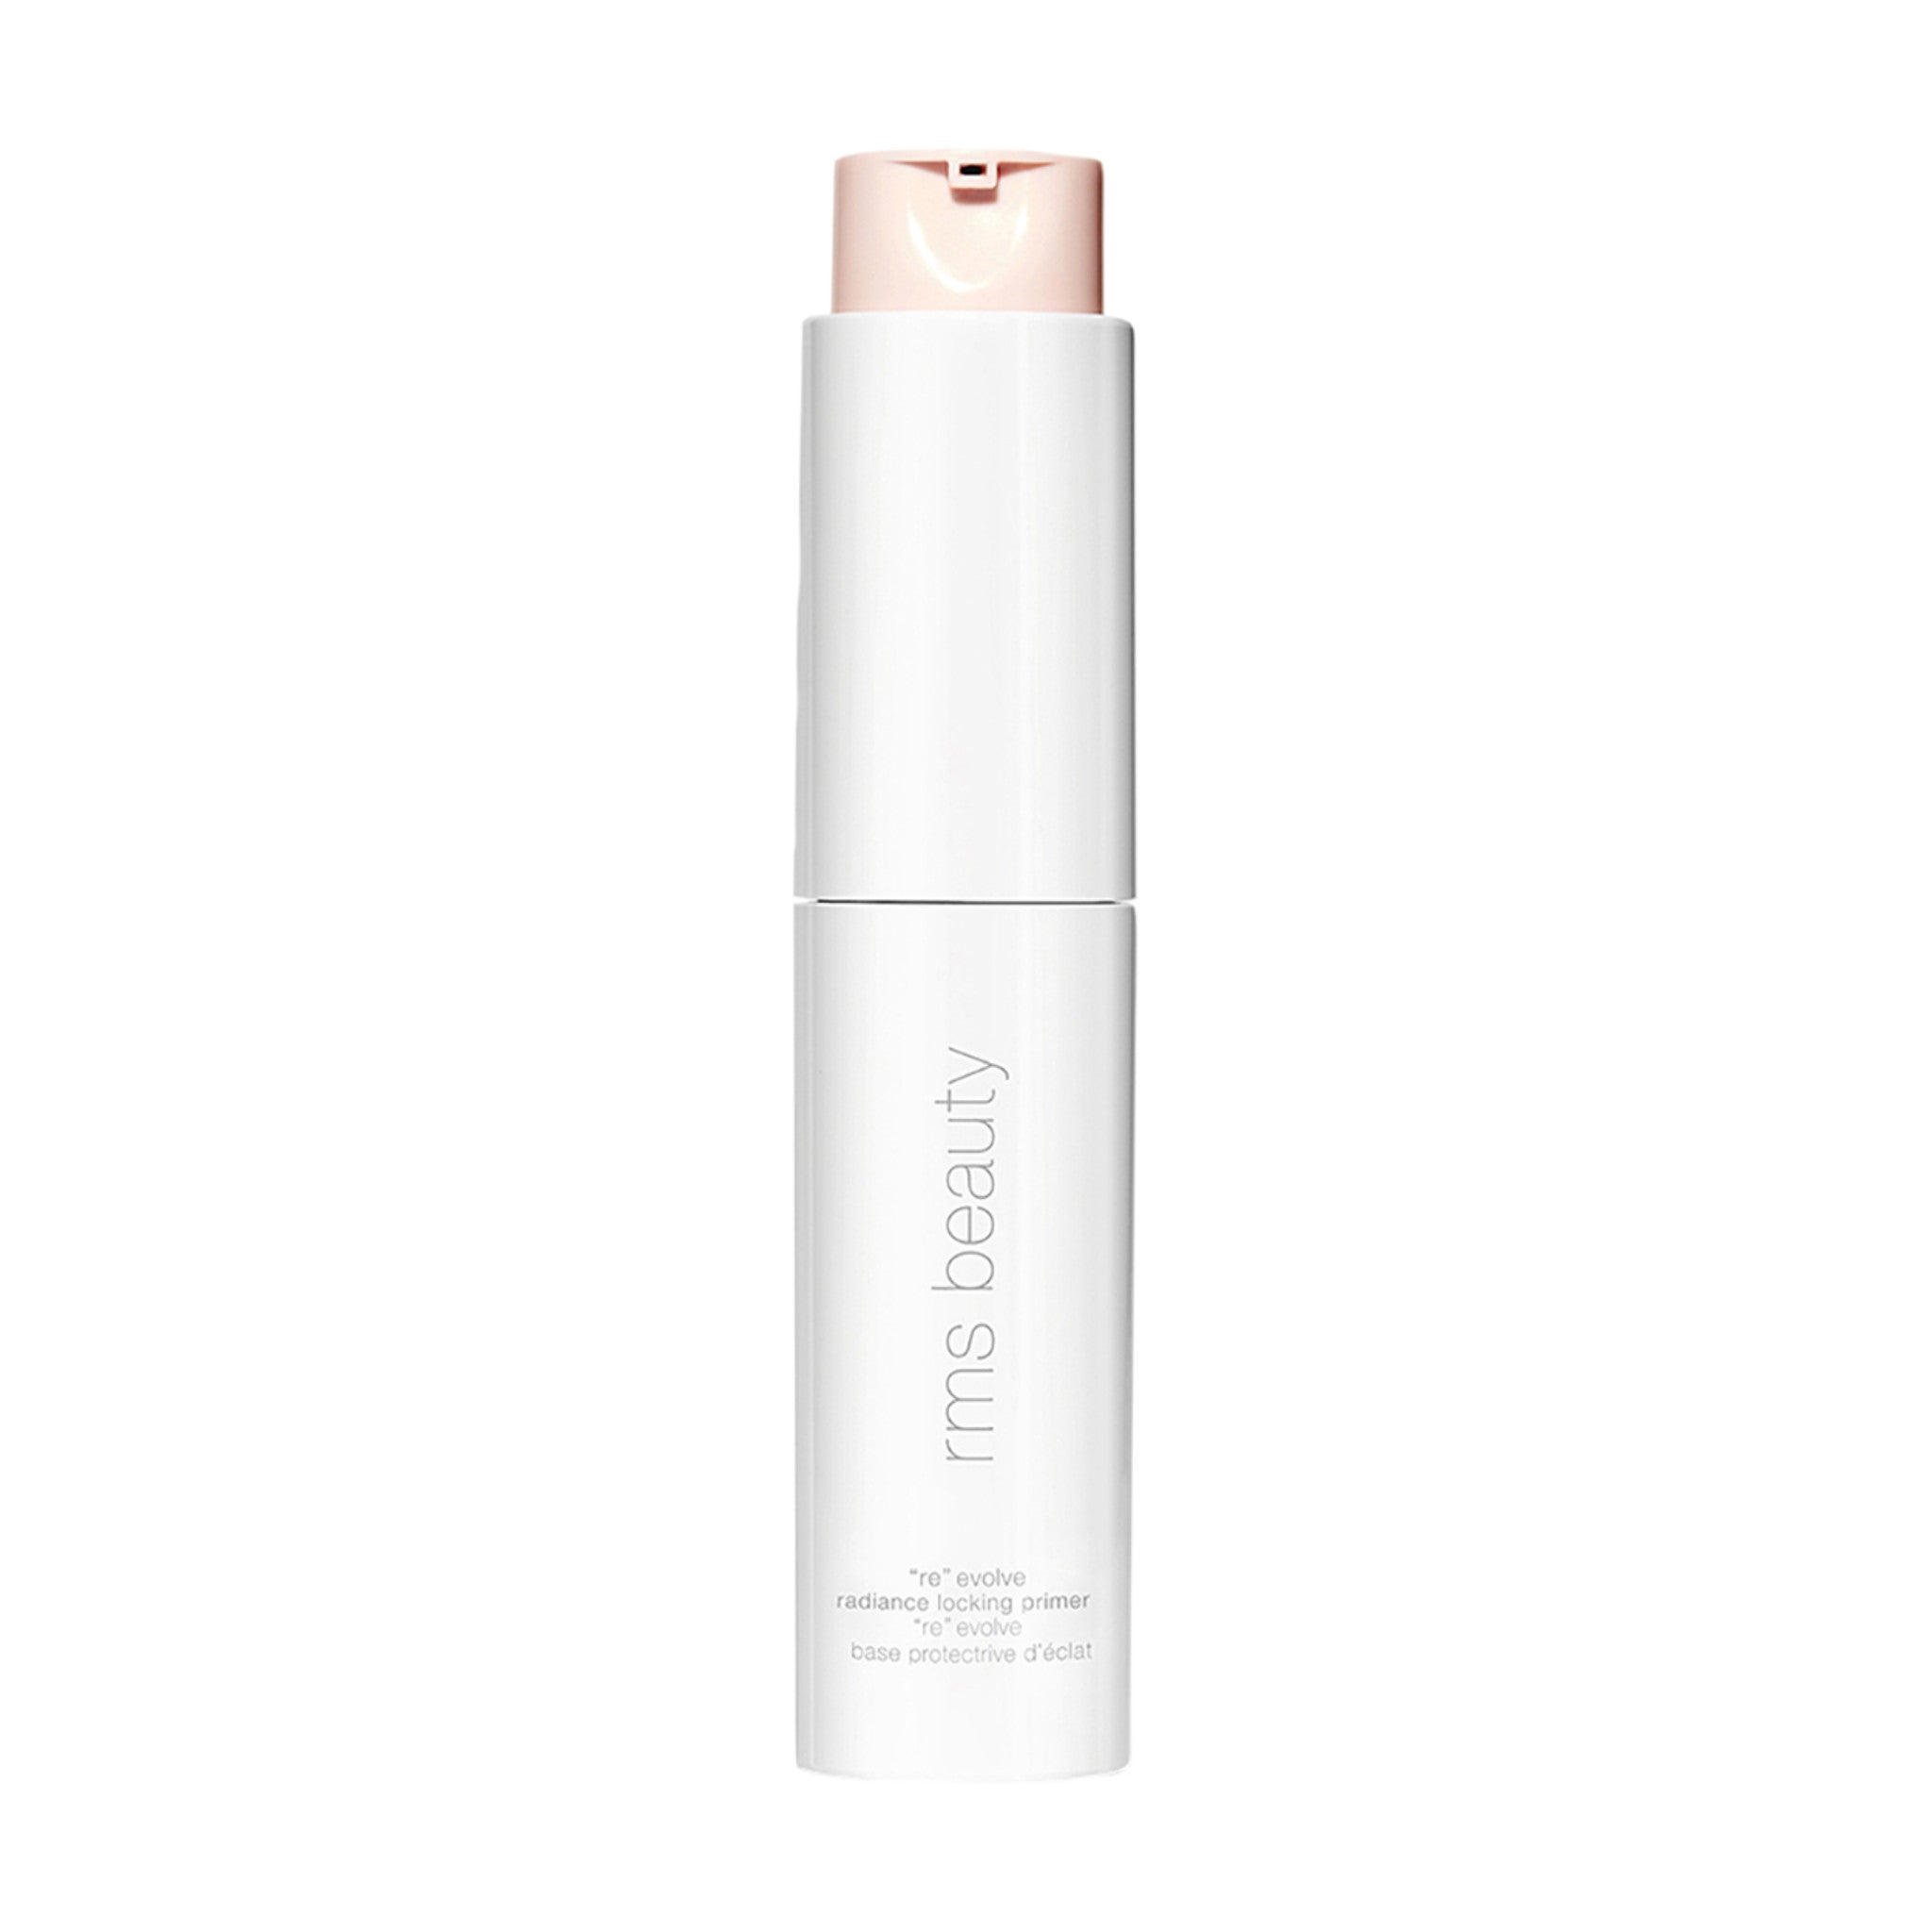 RMS Beauty ReEvolve Radiance Locking Primer Refill main image. This product is in the color clear